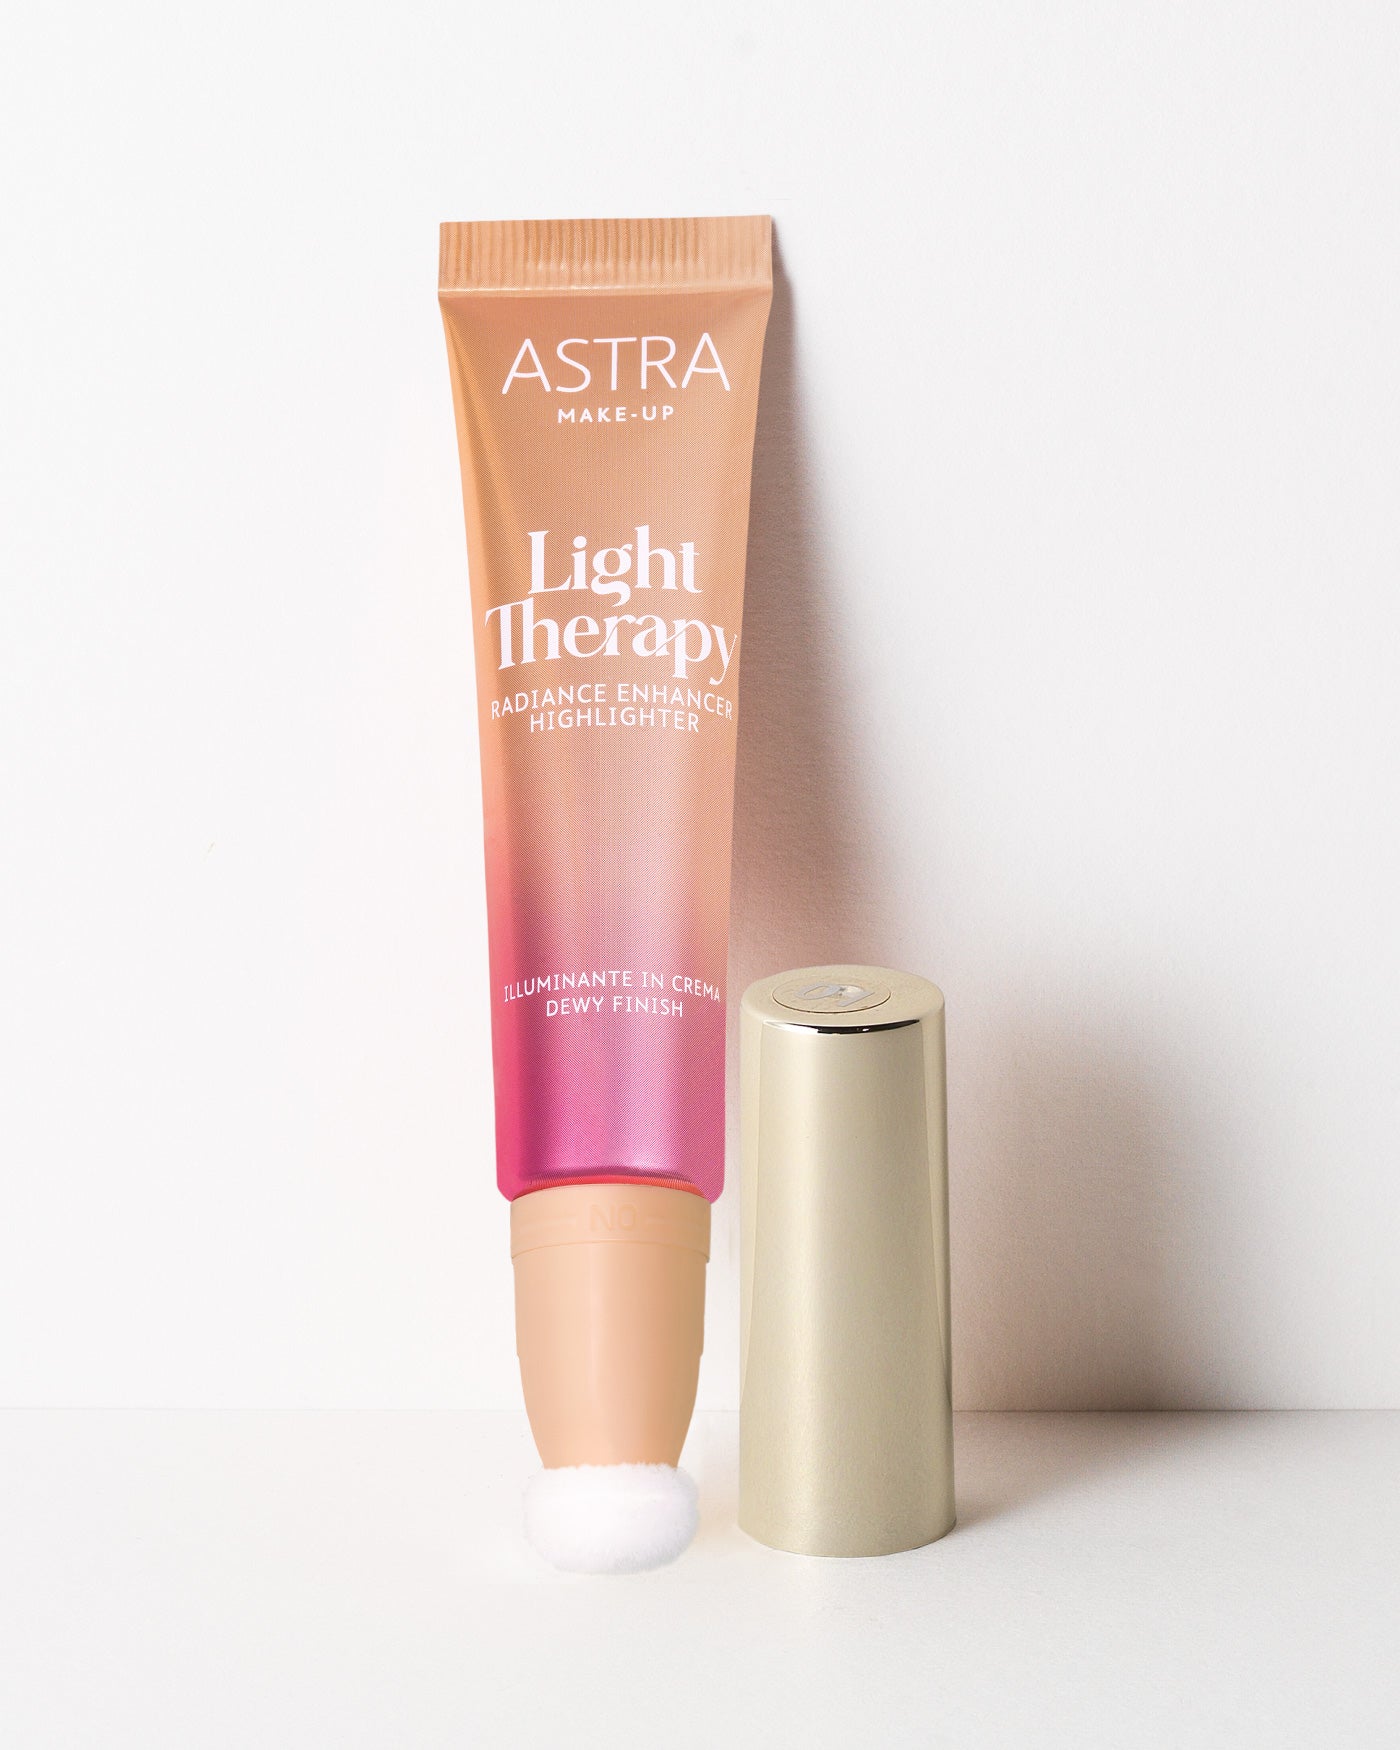 LIGHT THERAPY - Highlighter - Astra Make-Up